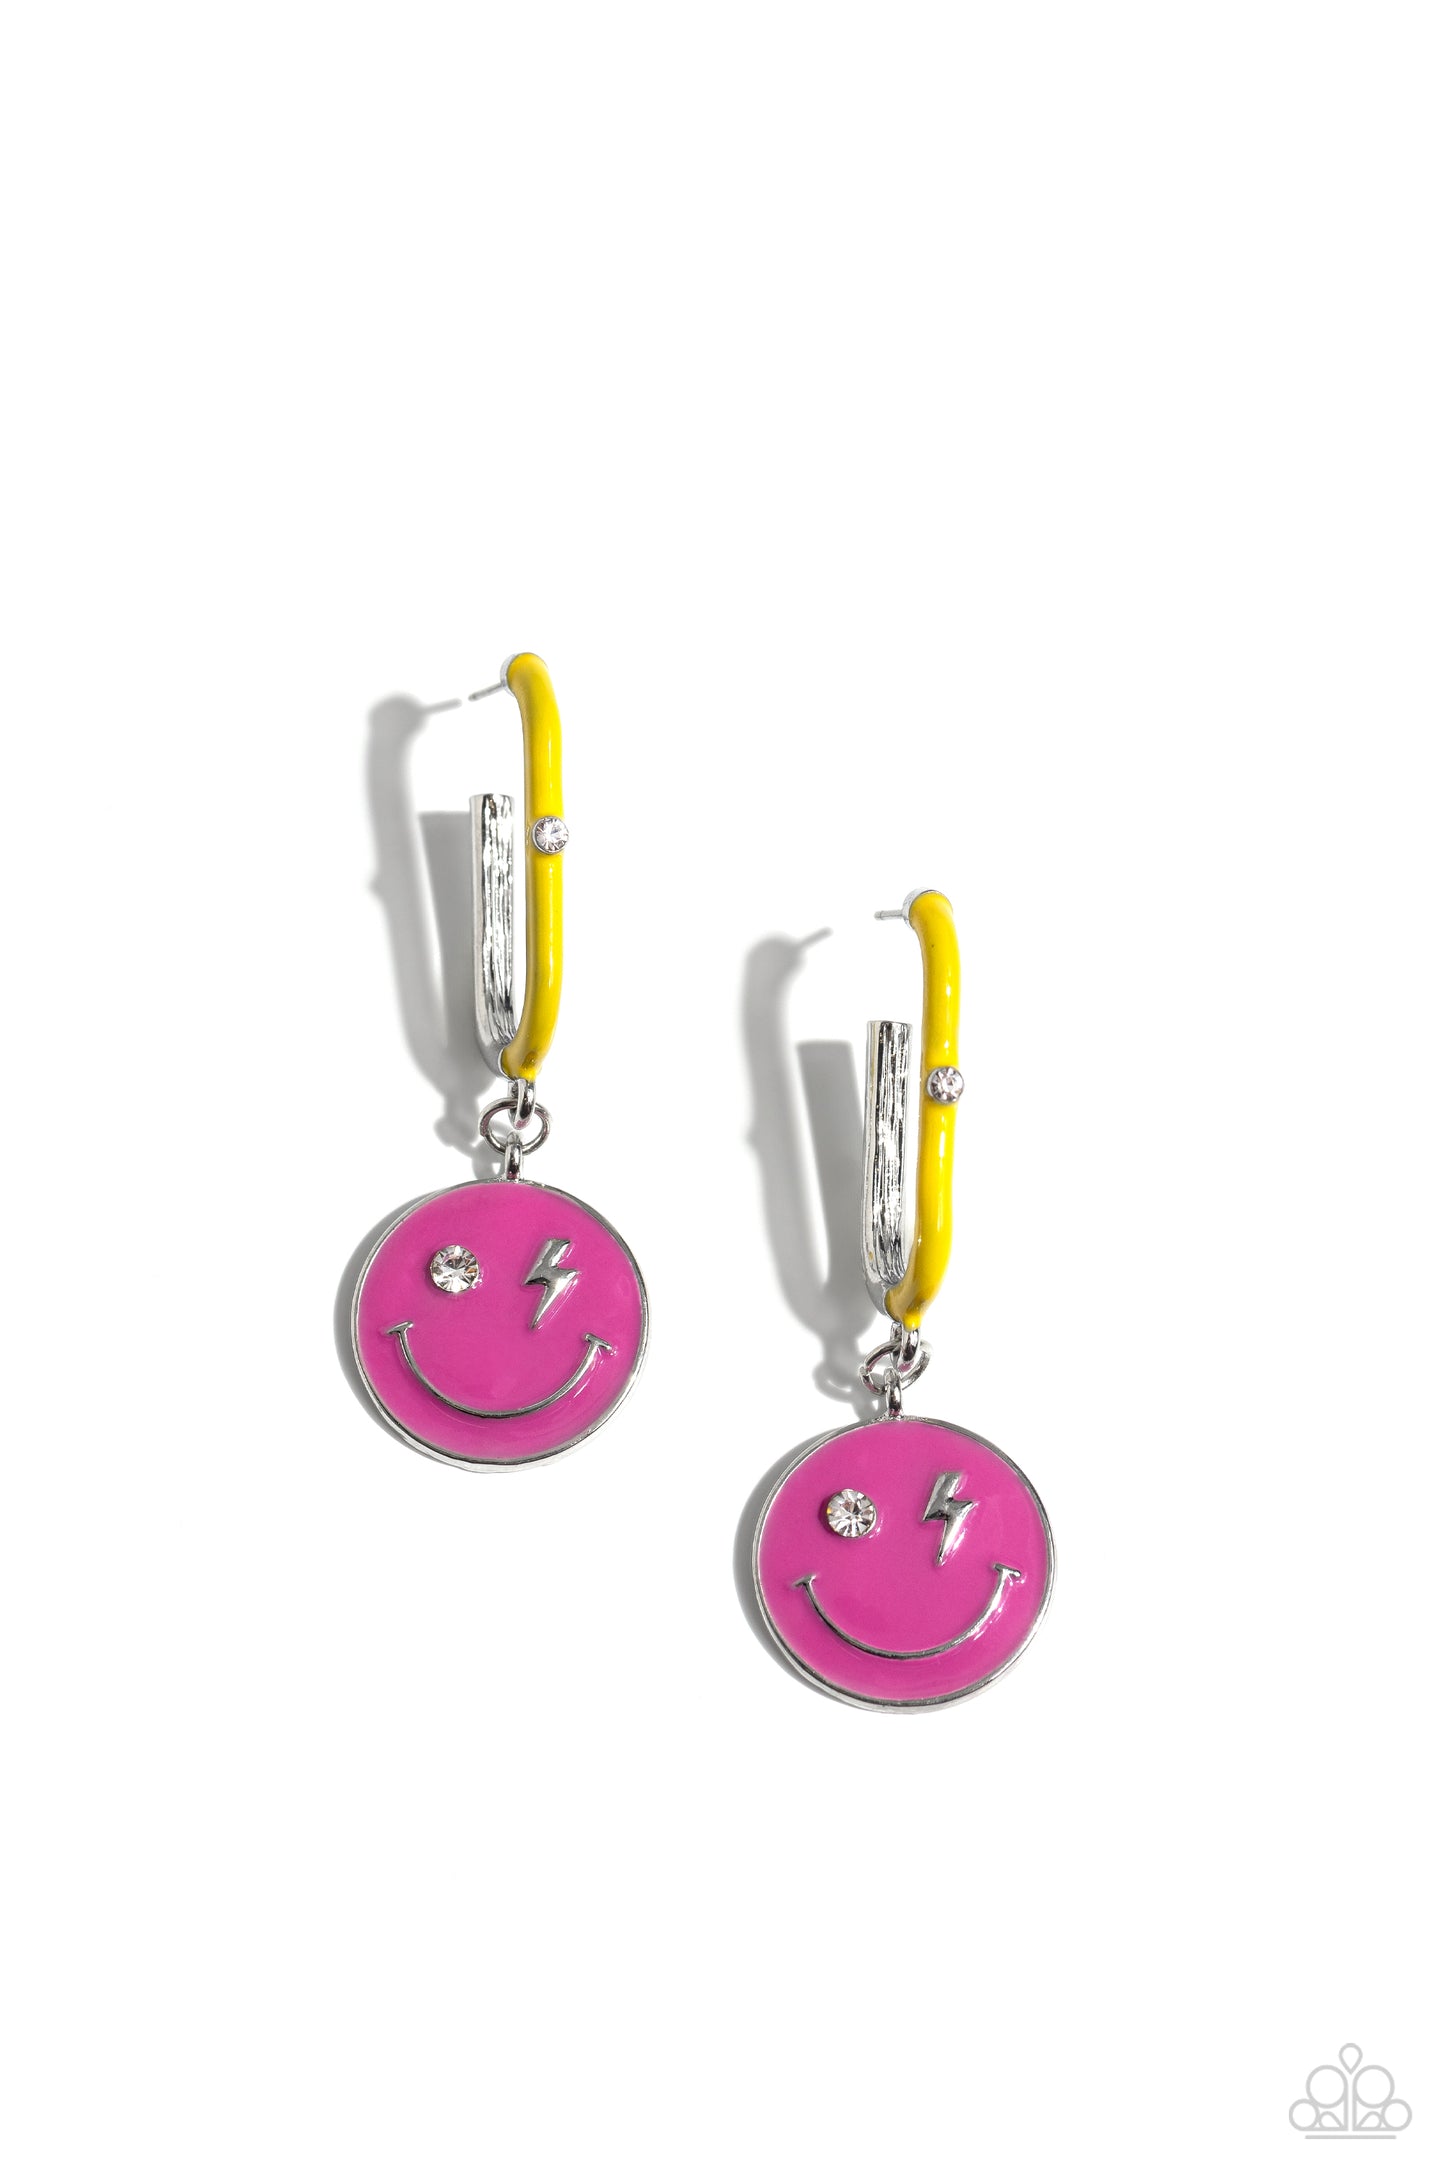 Personable Pizzazz Pink Smiley Face Hoop Earring - Paparazzi Accessories  Featuring a solitaire white rhinestone embellishment, a Rose Violet smiley face charm, with rhinestone and lightning bolt eyes, swings from a glistening half High Visibility-painted oblong silver hoop, creating a vivacious, charming display. Earring attaches to a standard post fitting. Hoop measures approximately 1" in diameter.  Sold as one pair of hoop earrings.  Sku:  P5HO-PKXX-062XX